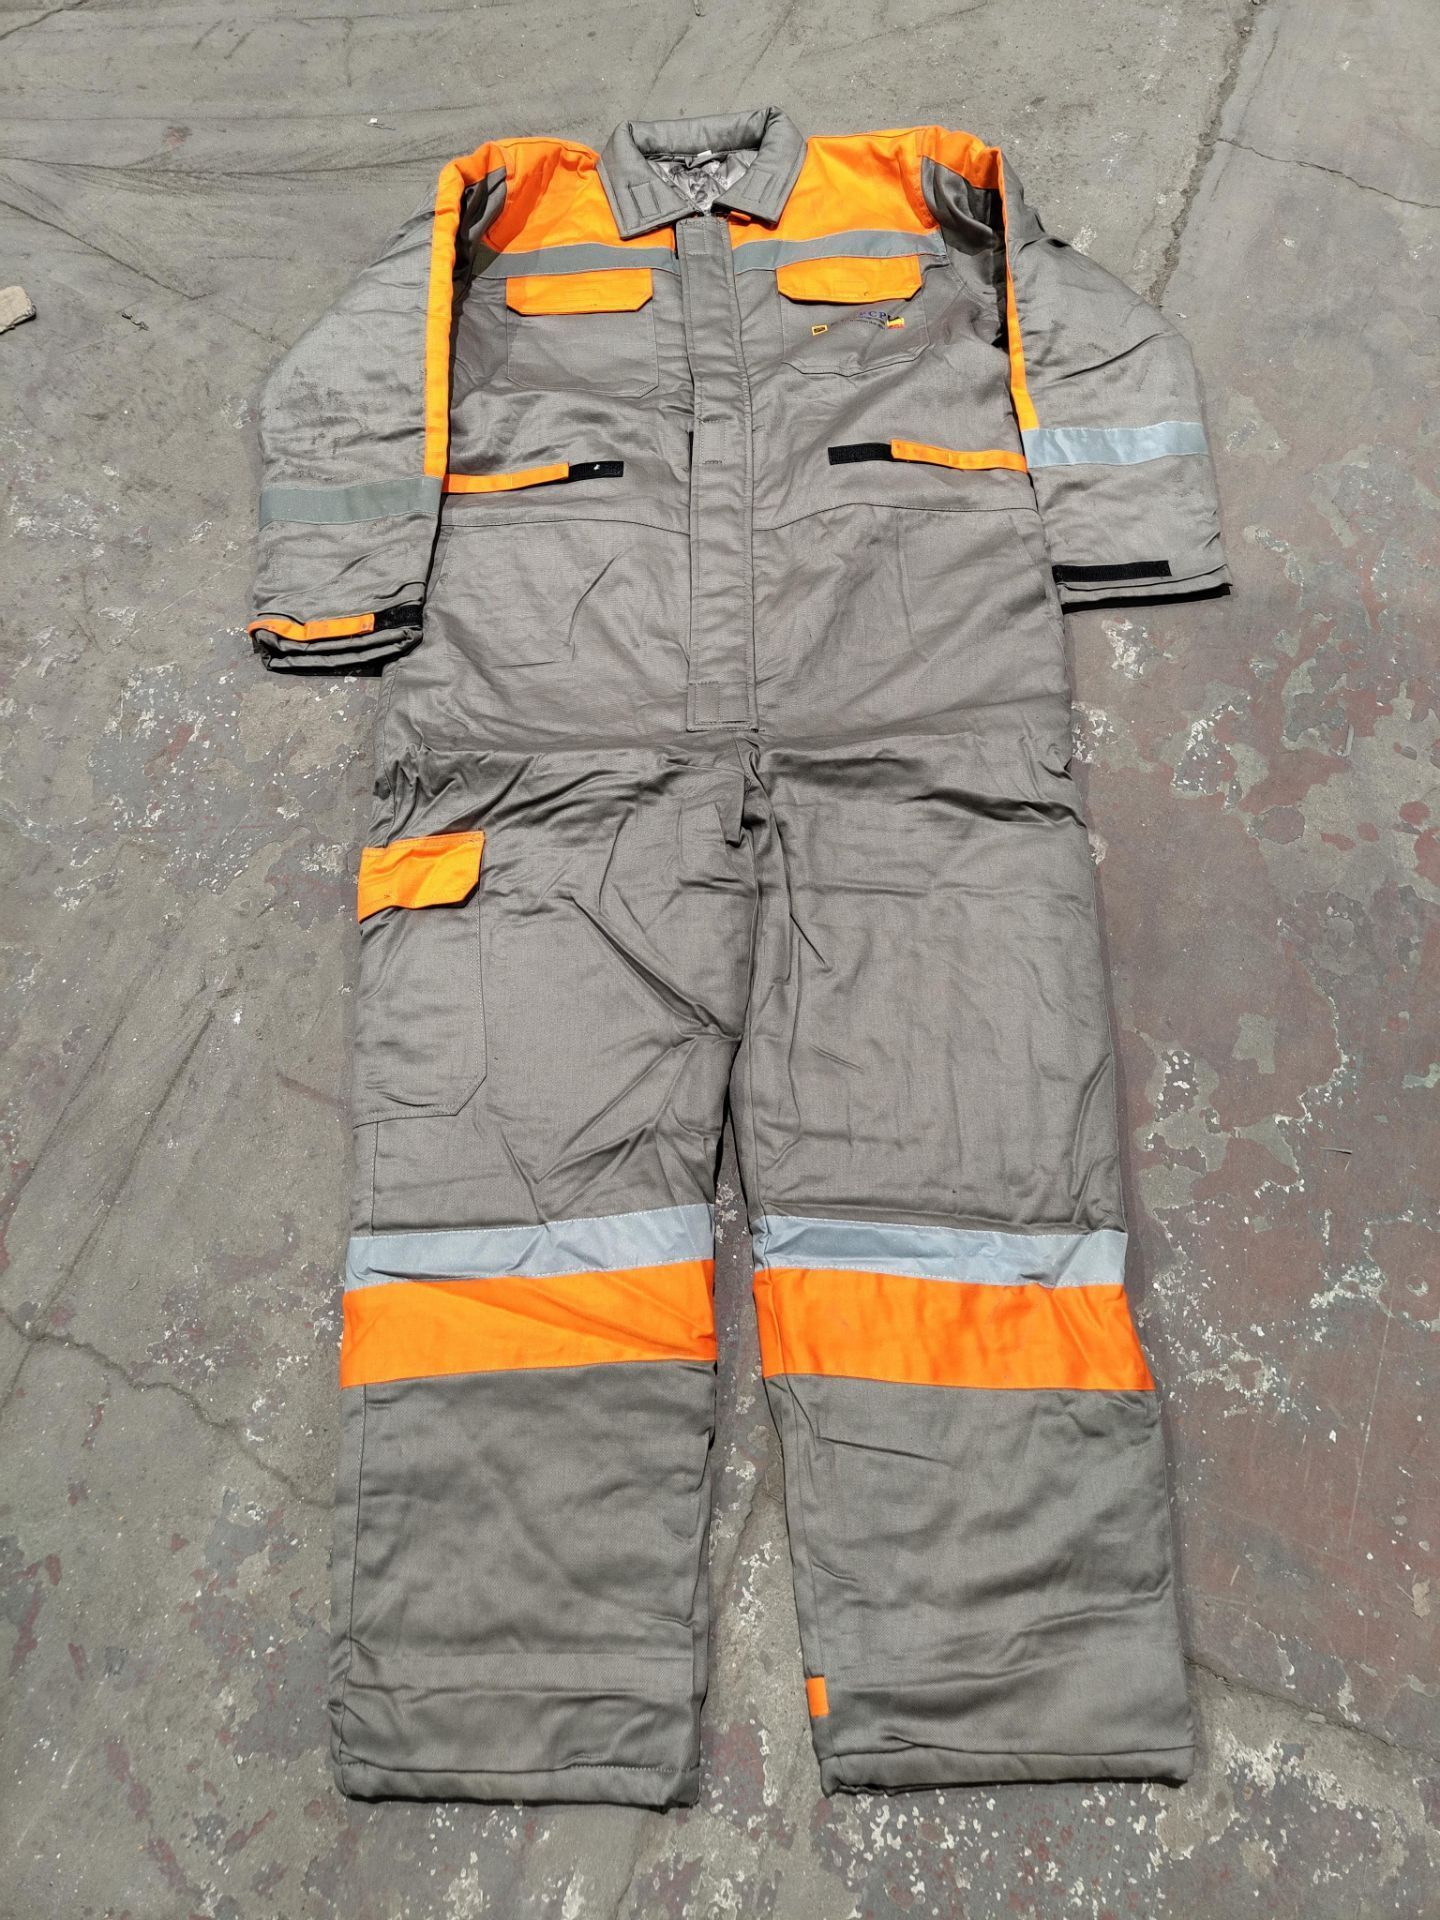 12 X BRAND NEW WINTER PROFESSIONAL COLD WEATHER PROTECTION COVERALLS (SIZES MAY VARY) R5.5